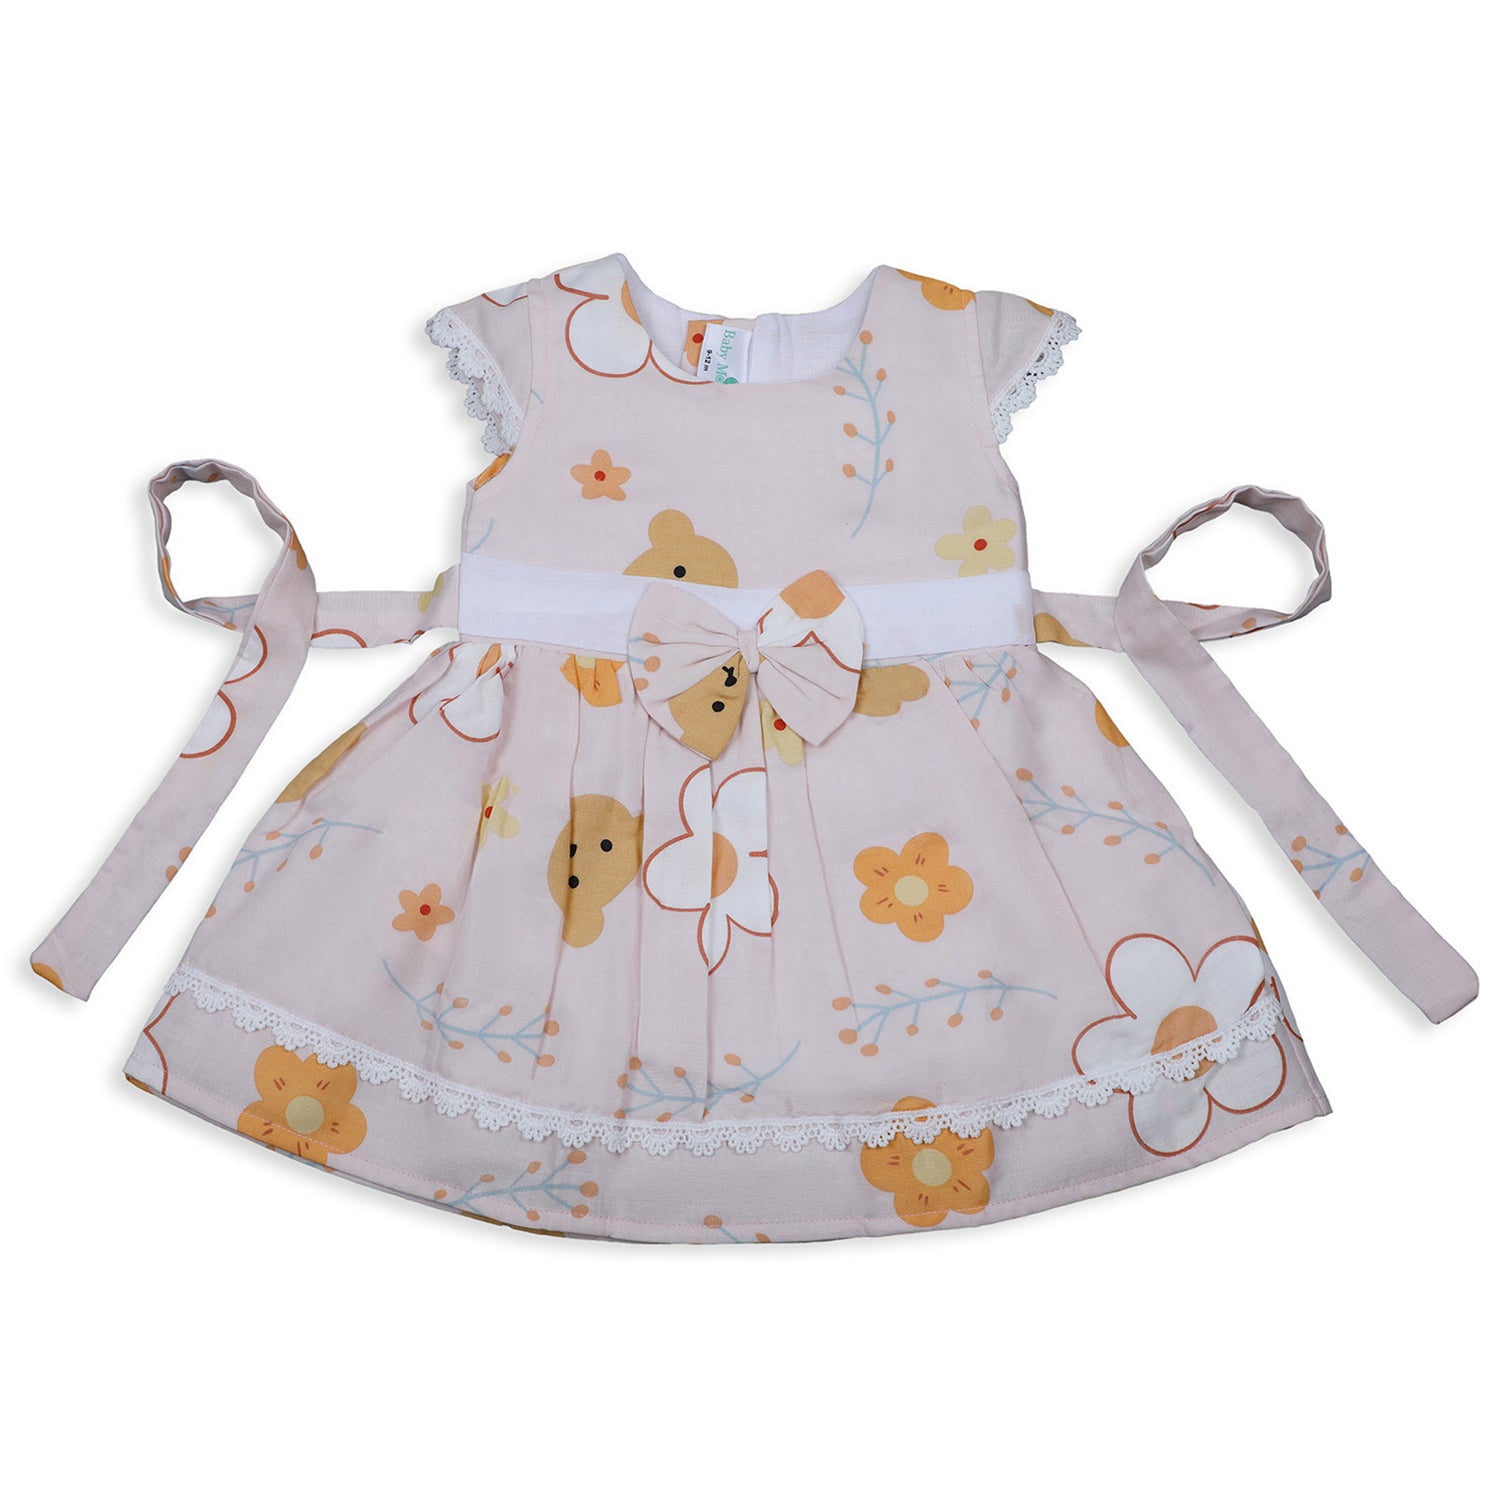 Share more than 129 baby frock decoration